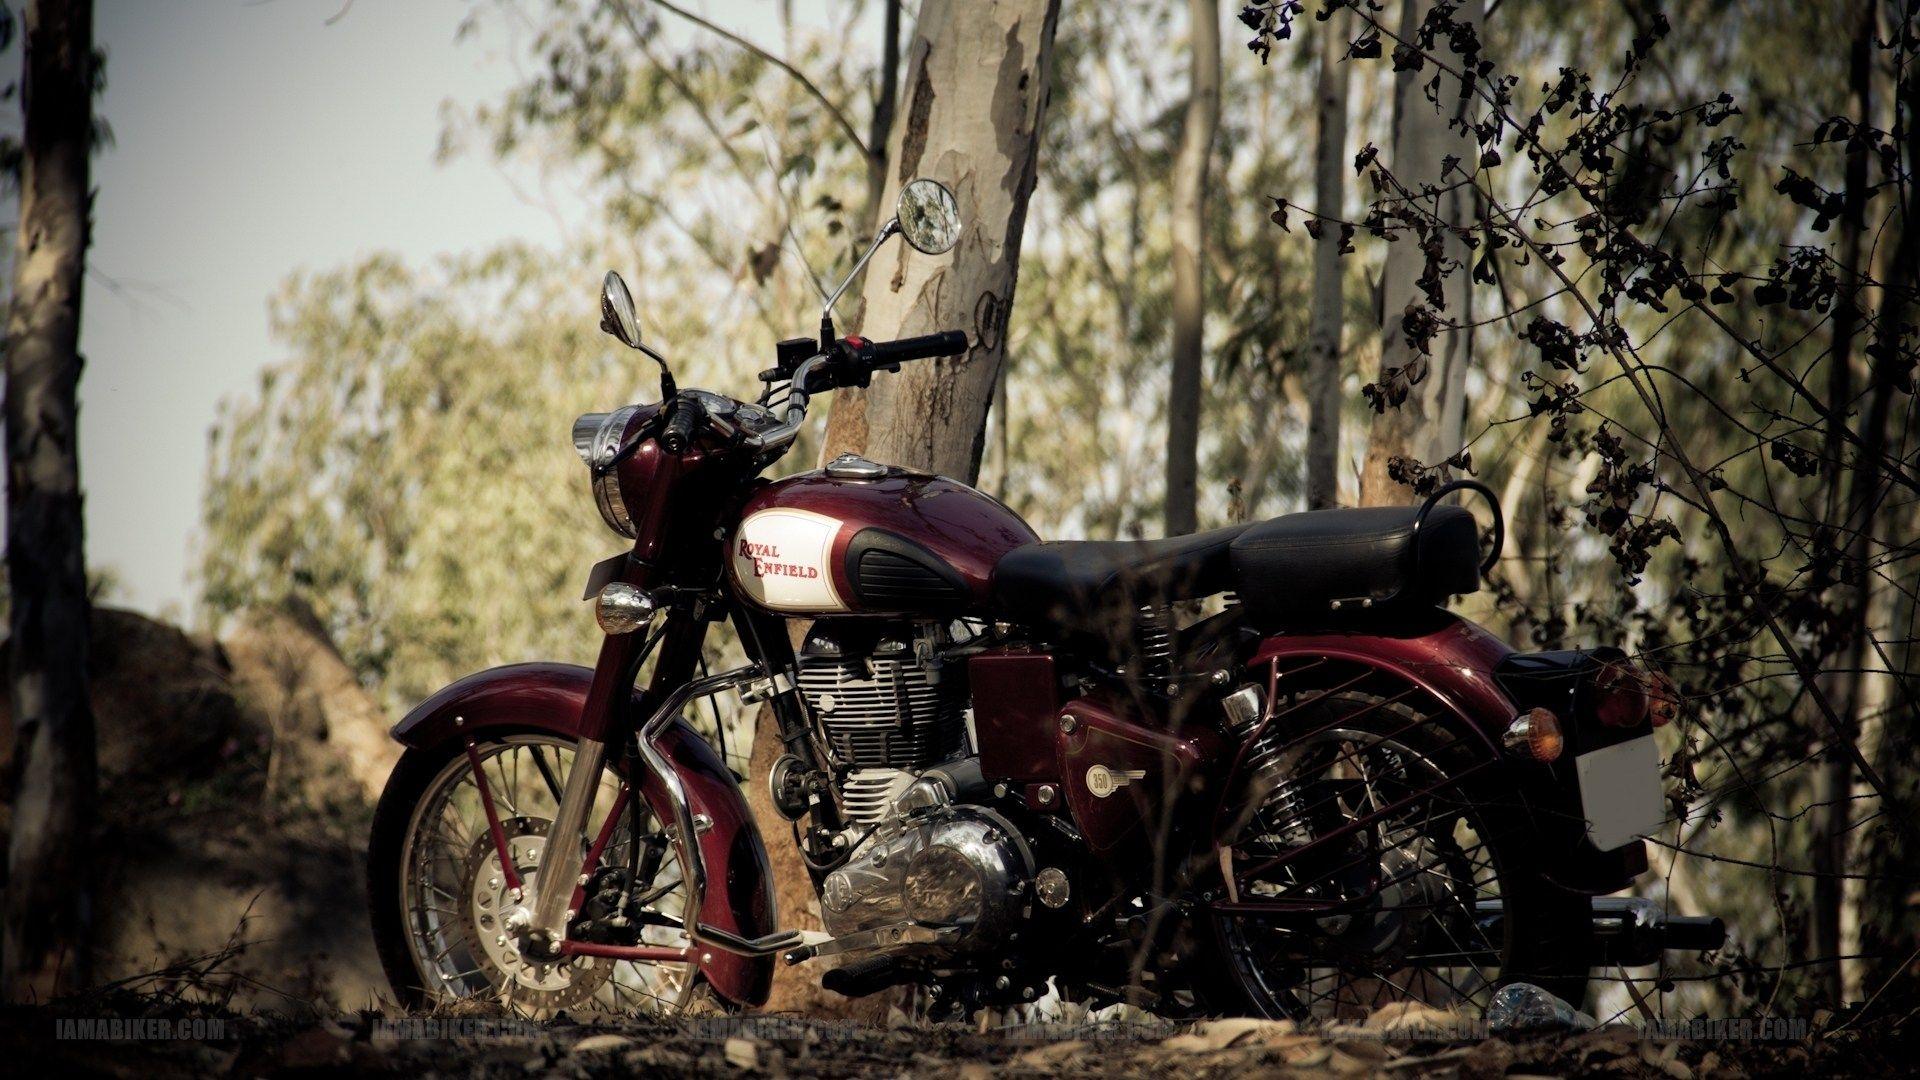 Royal Enfield Classic 350 Wallpaper 1366x768 (Picture)